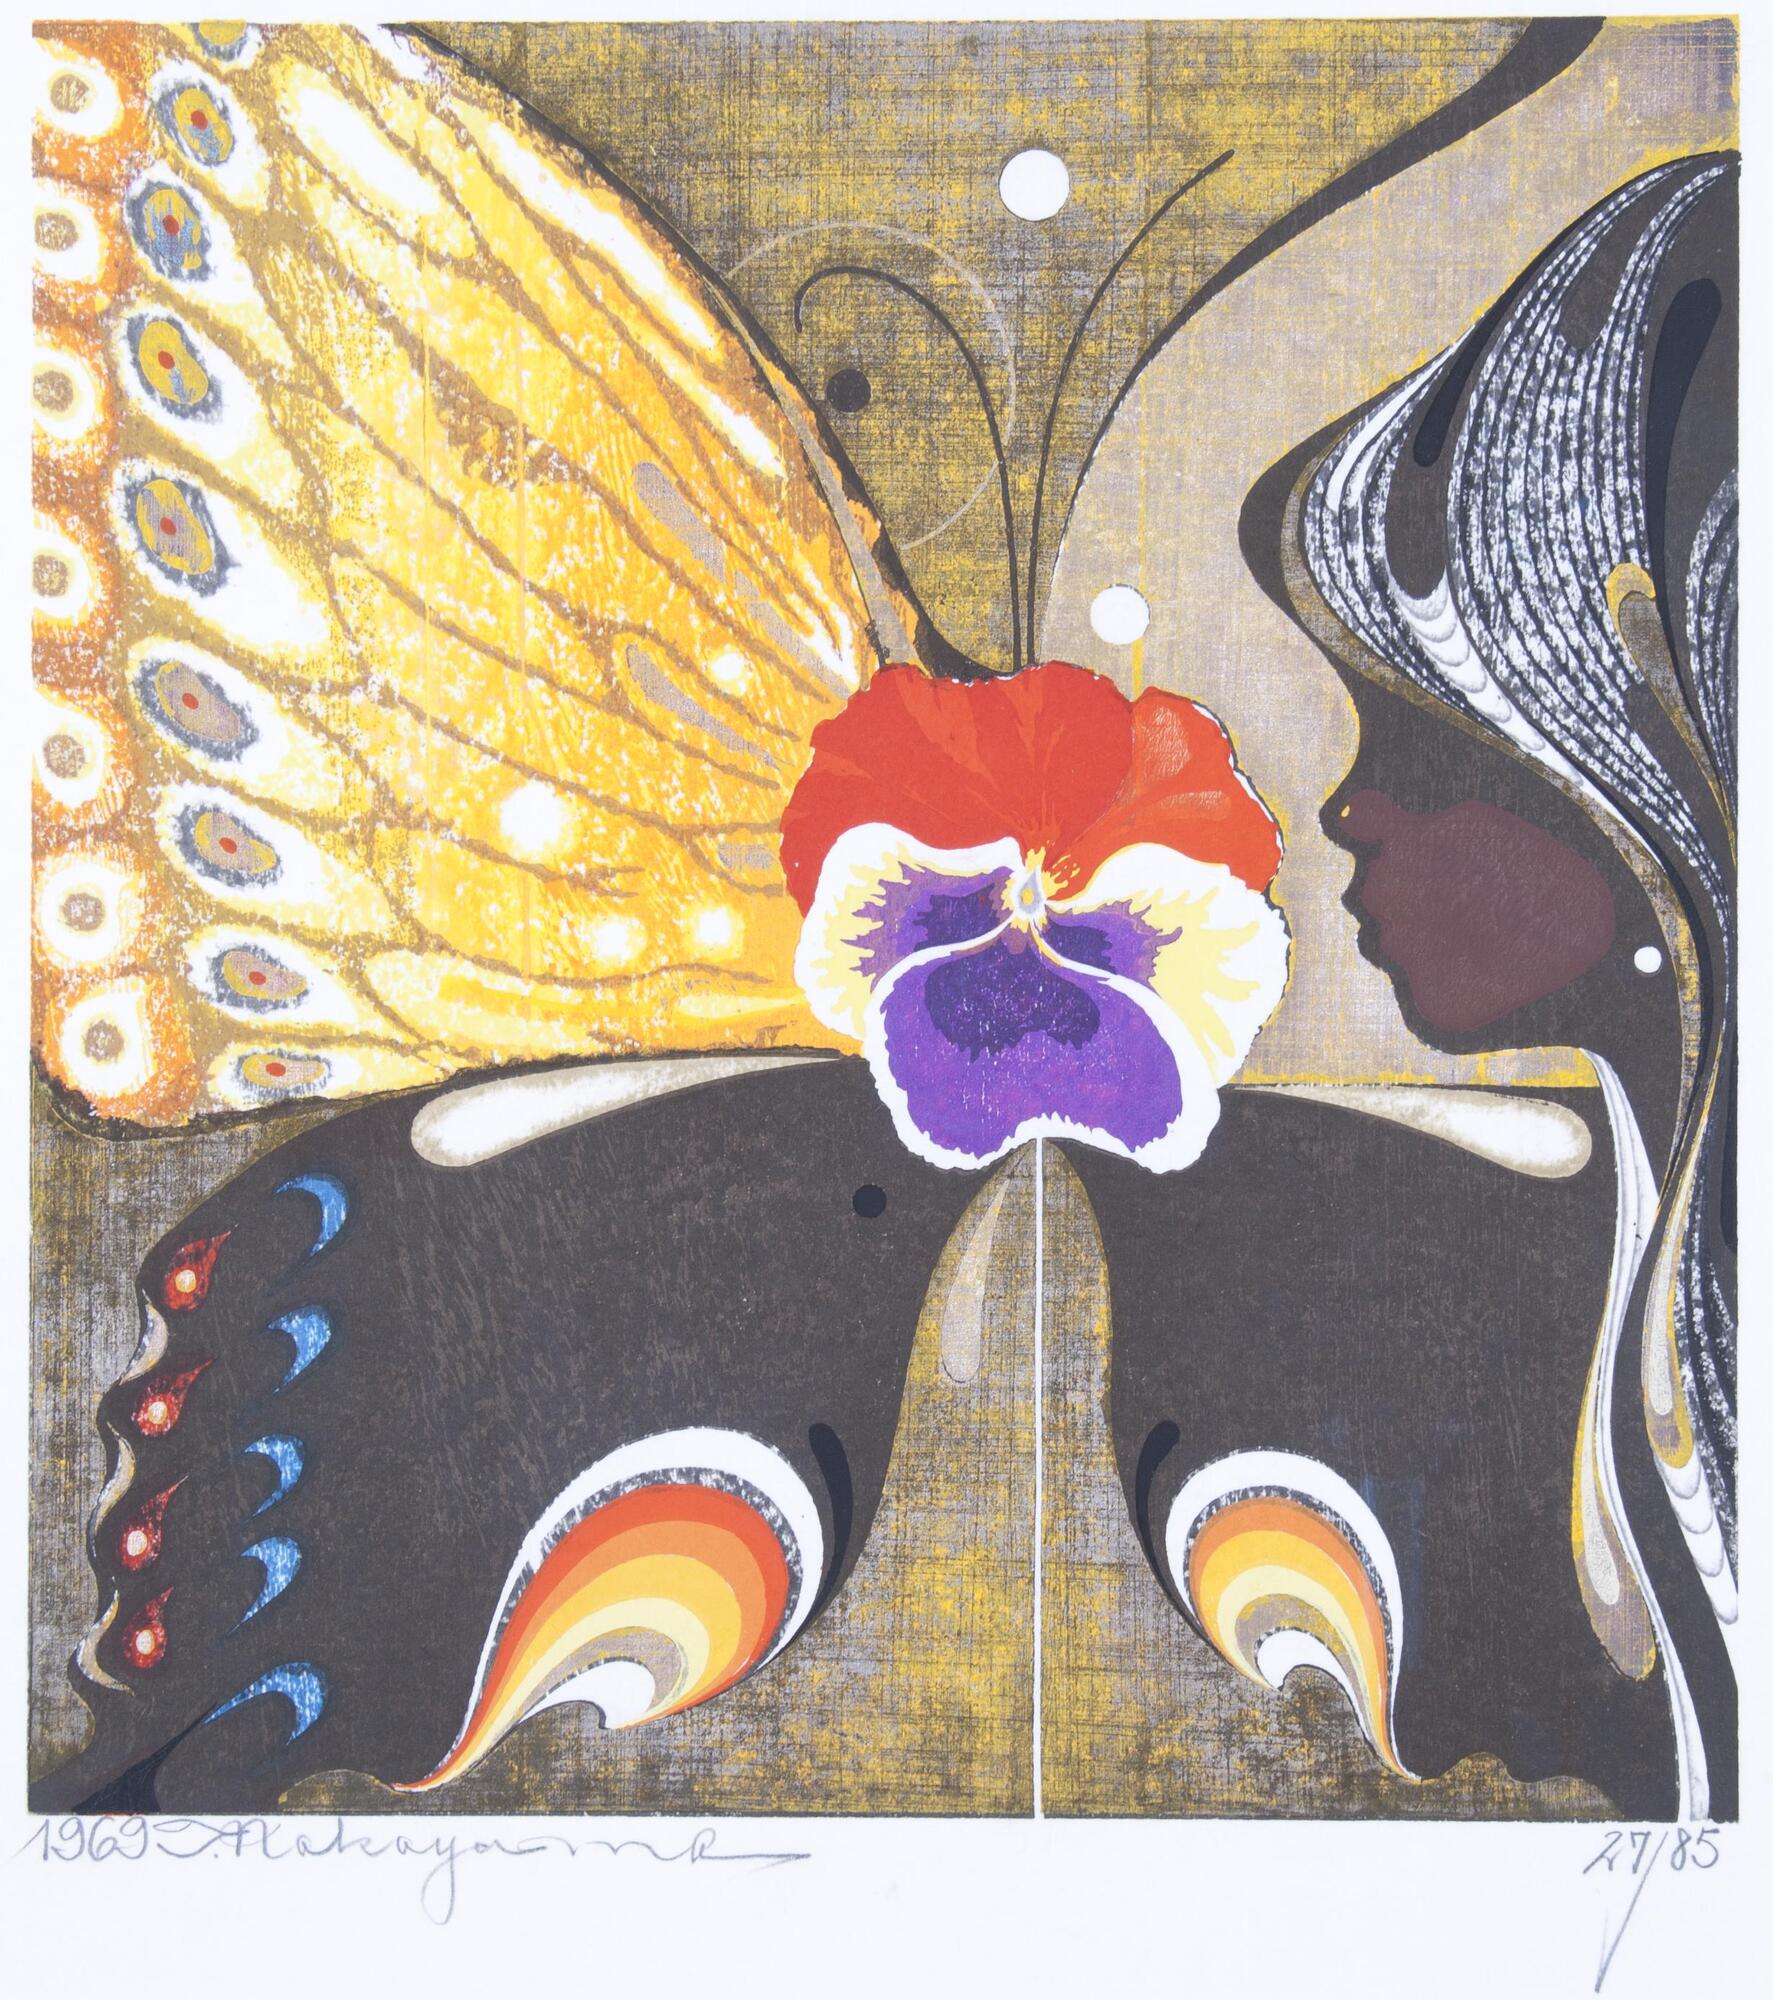 A girl with her head in profile, her black hair is highlighted with white, brown, and gold highlights. A large butterfly takes up most of the background; it is yellow, tan, and brown and has patterned designs. Where the body of the butterfly should be is a red, purple, white, and yellow pansy. The background behind the butterfly is faded gold.